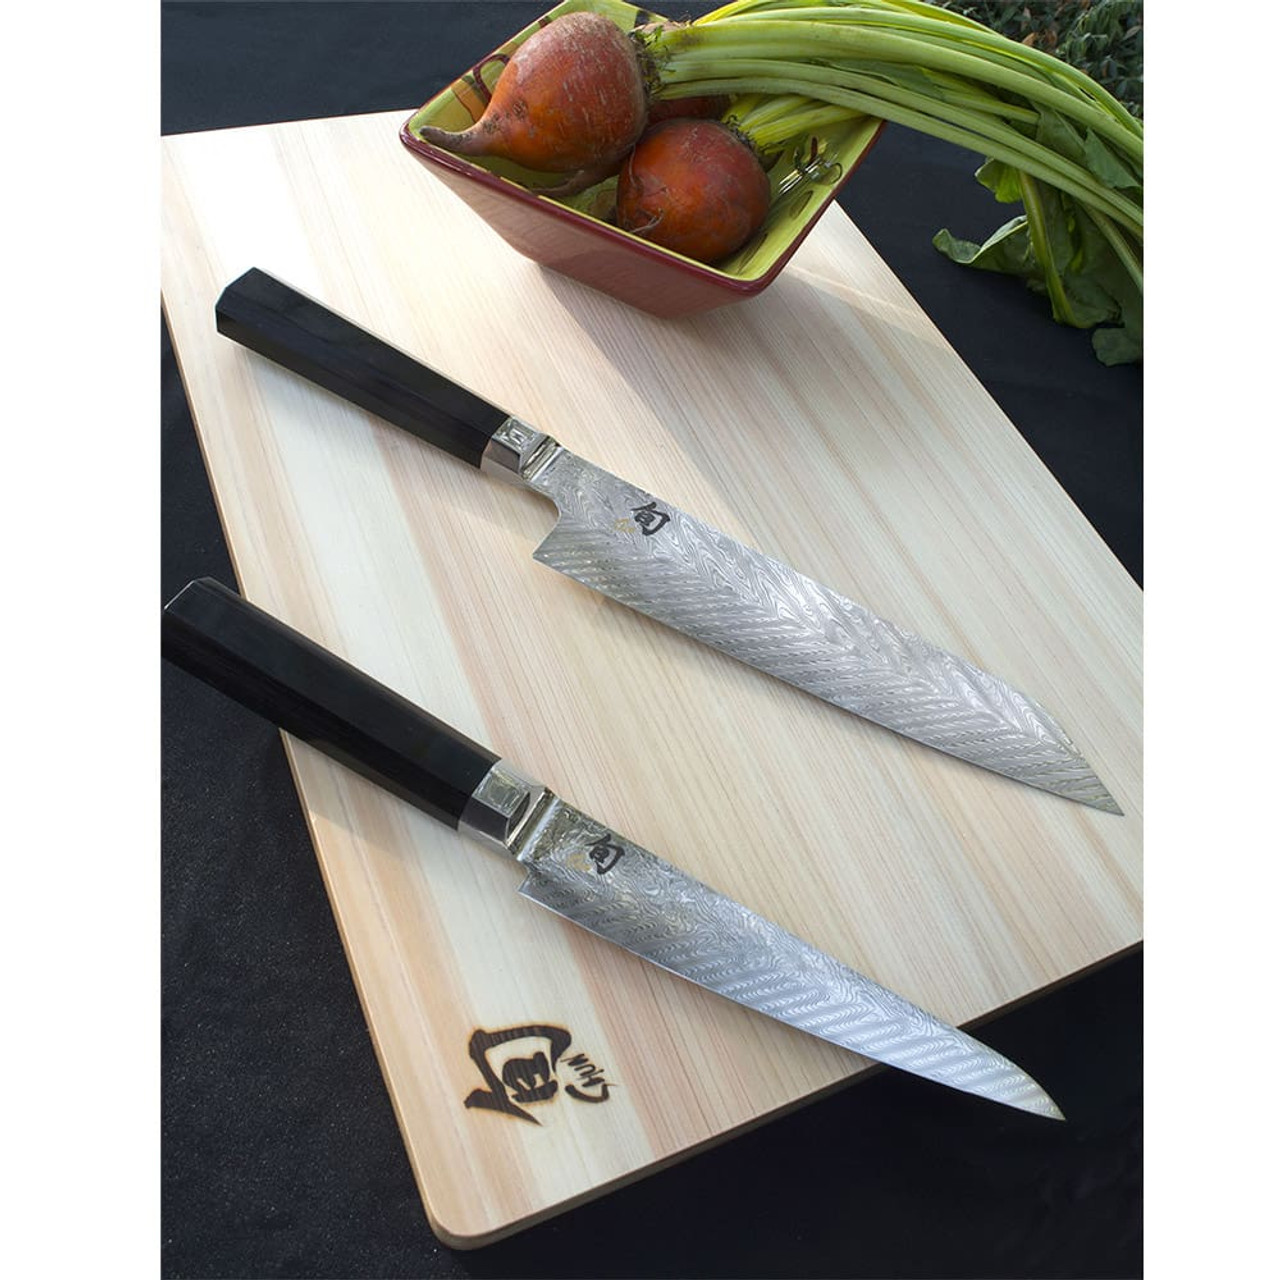 https://cdn11.bigcommerce.com/s-hccytny0od/images/stencil/1280x1280/products/1673/5883/shun-dual-core-utility-knife-2__13950.1533511916.jpg?c=2?imbypass=on